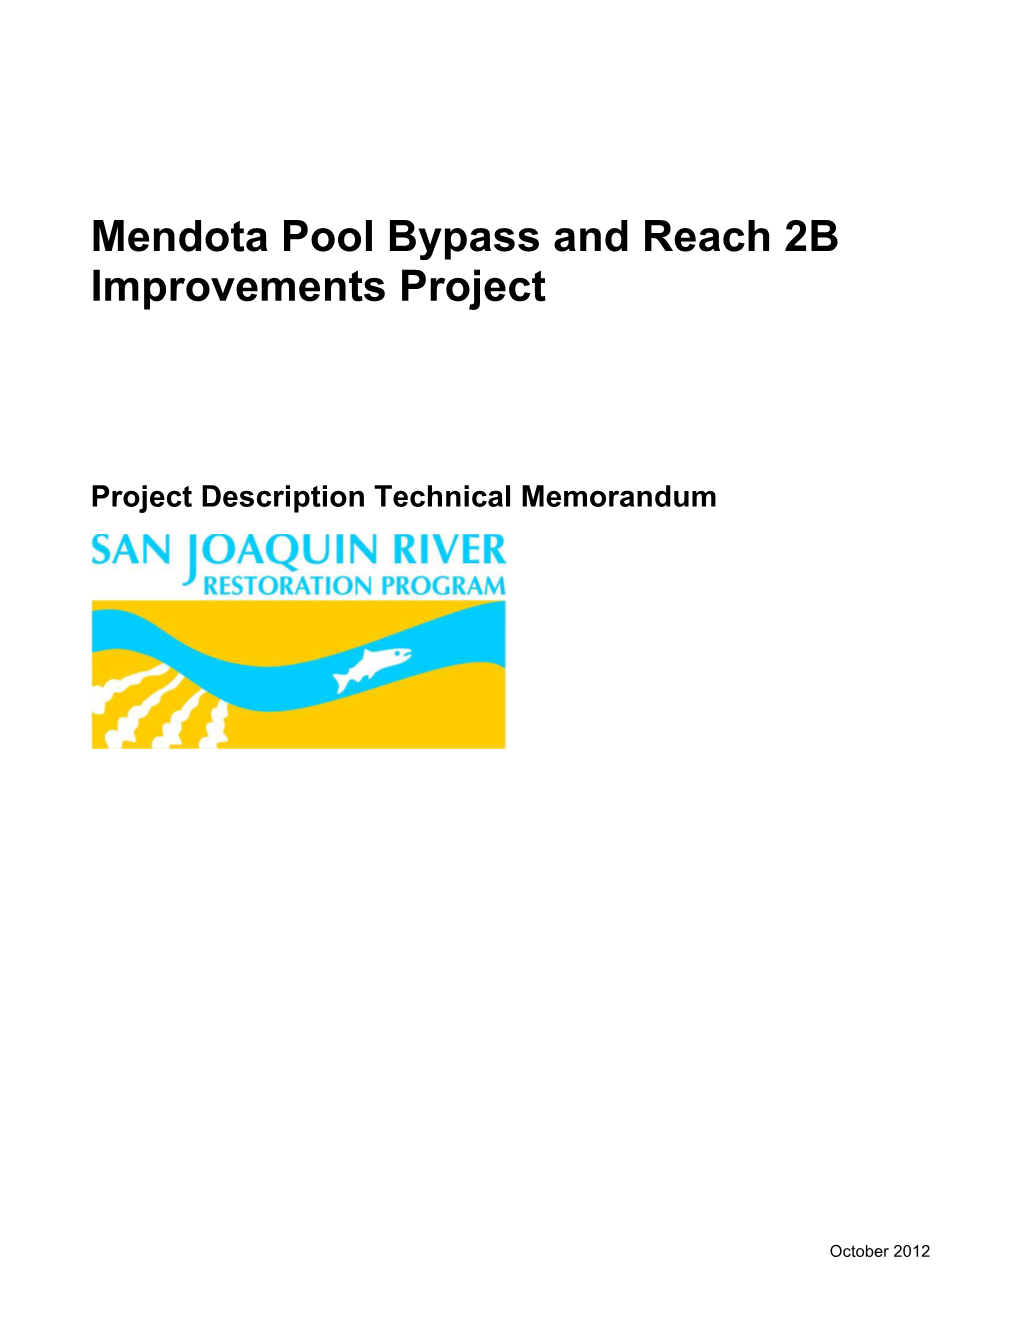 Mendota Pool Bypass and Reach 2B Improvements Project